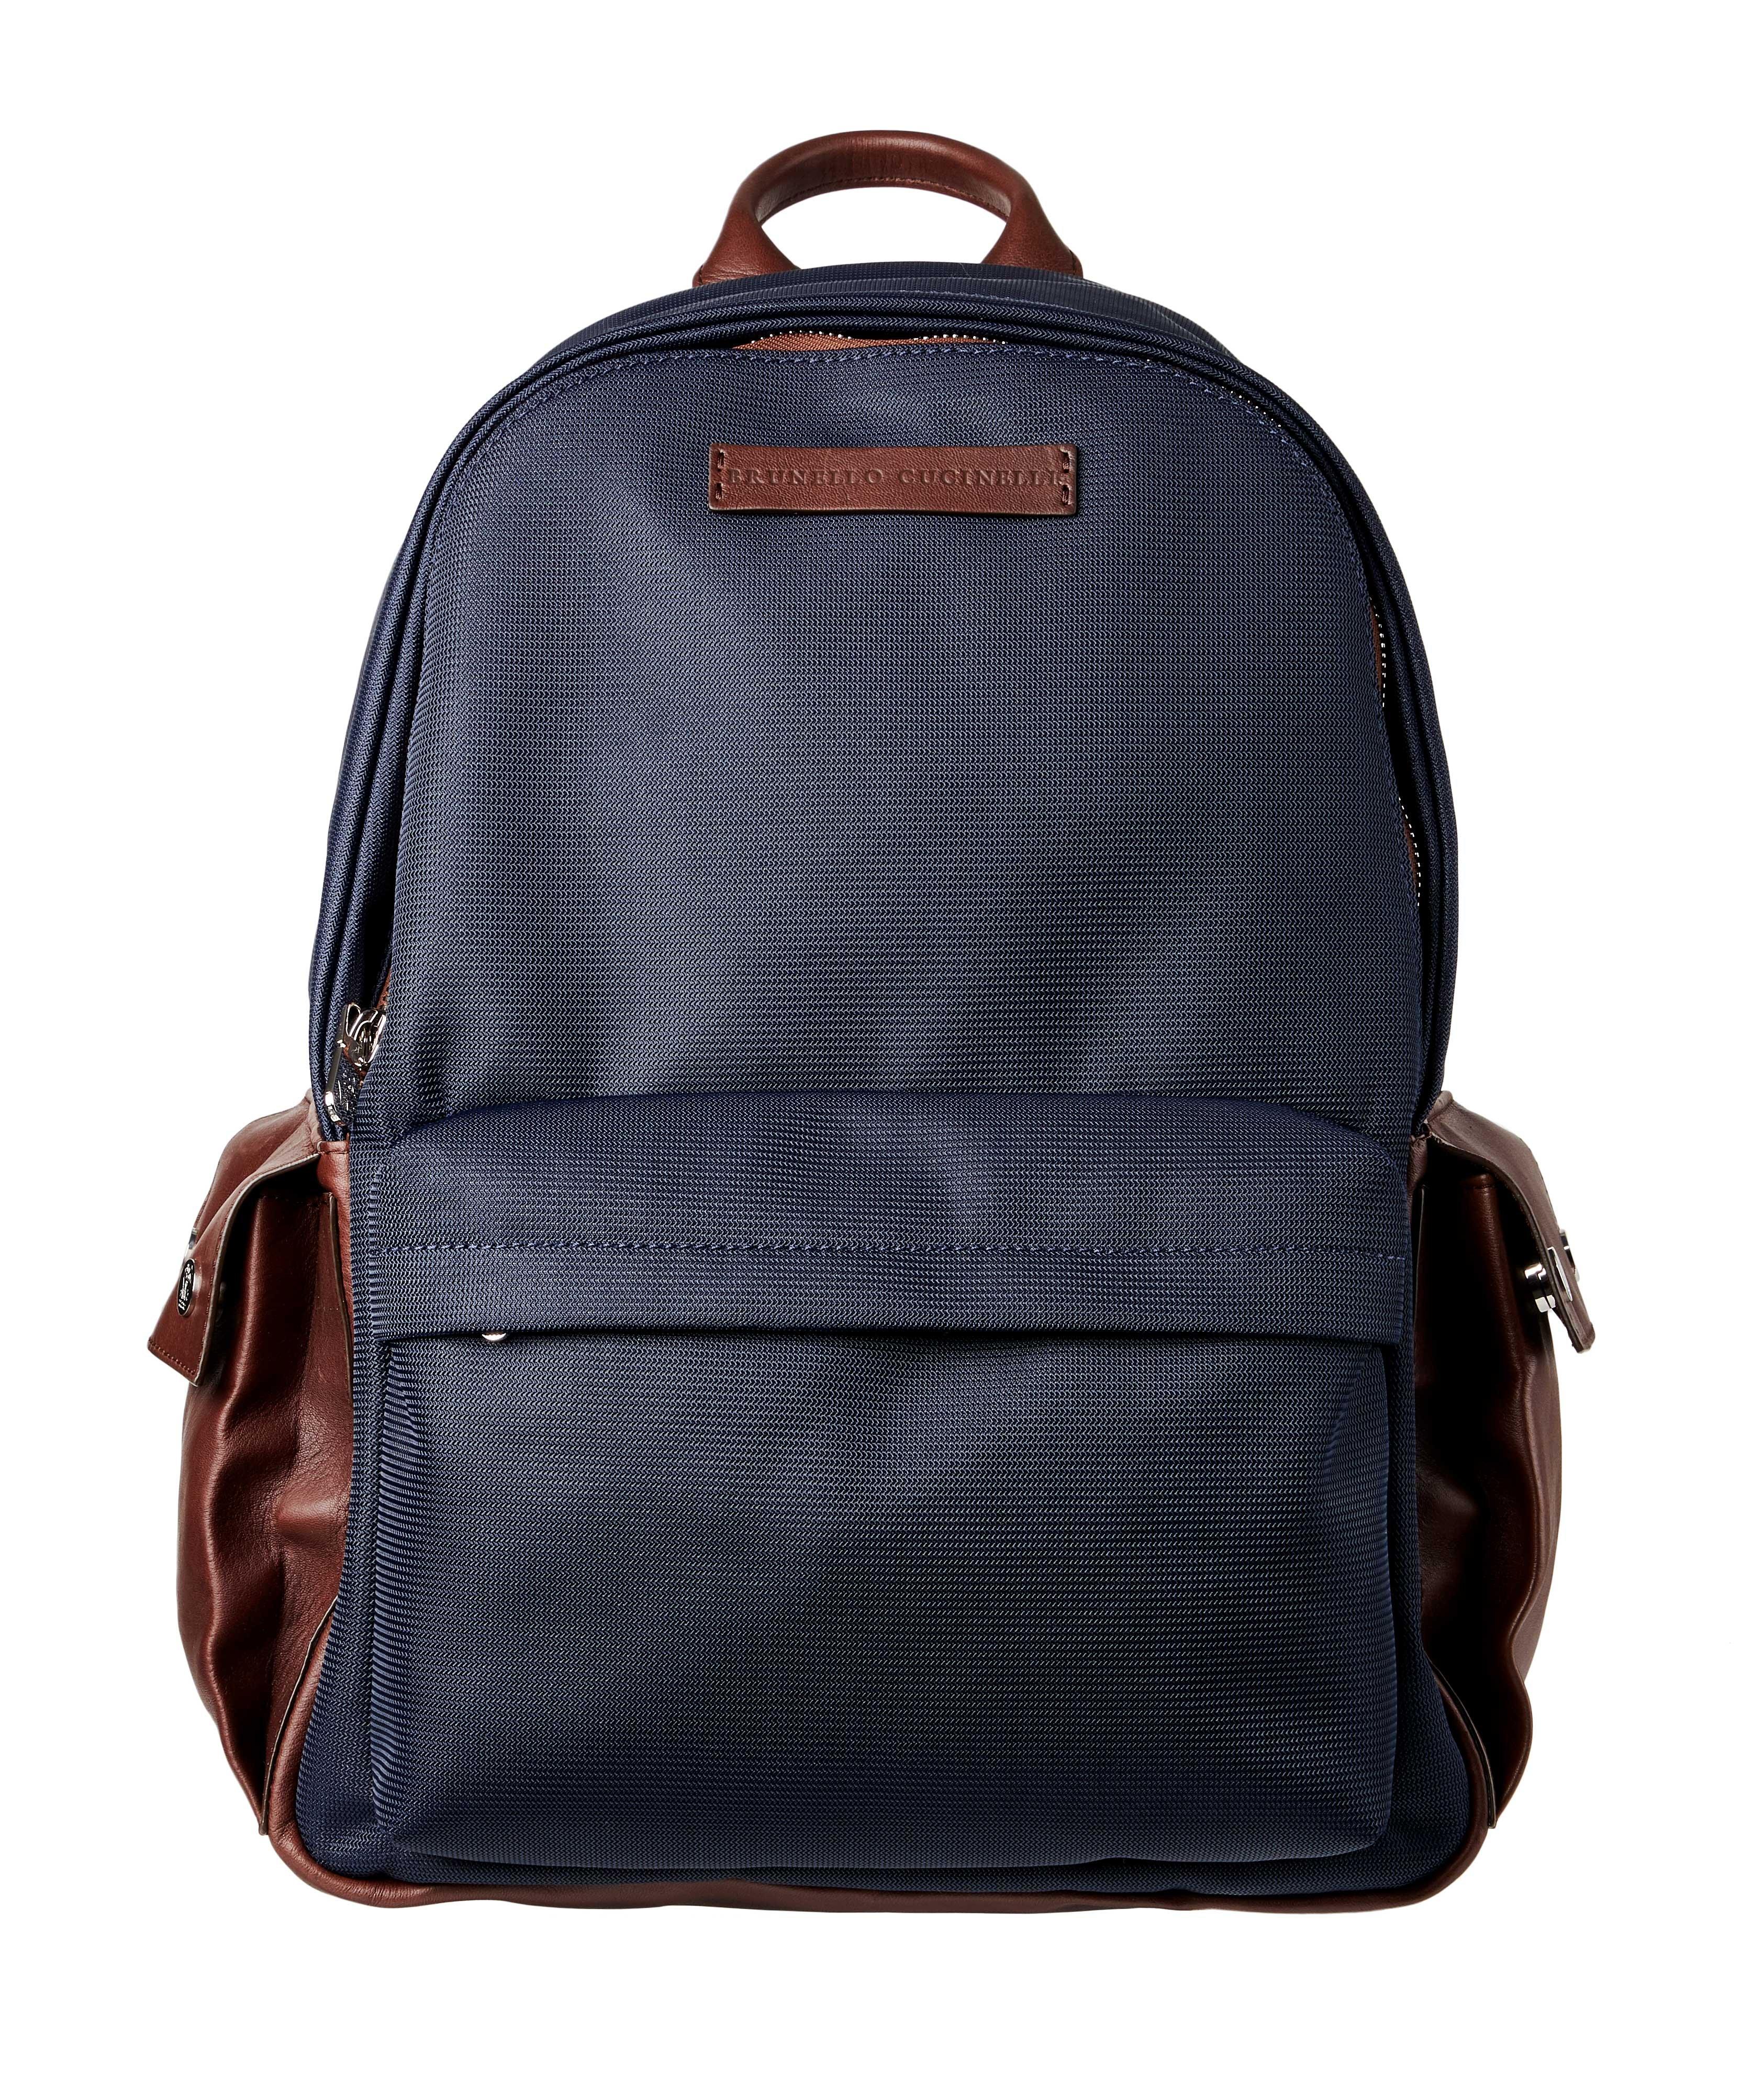 Nylon and Leather Backpack image 0